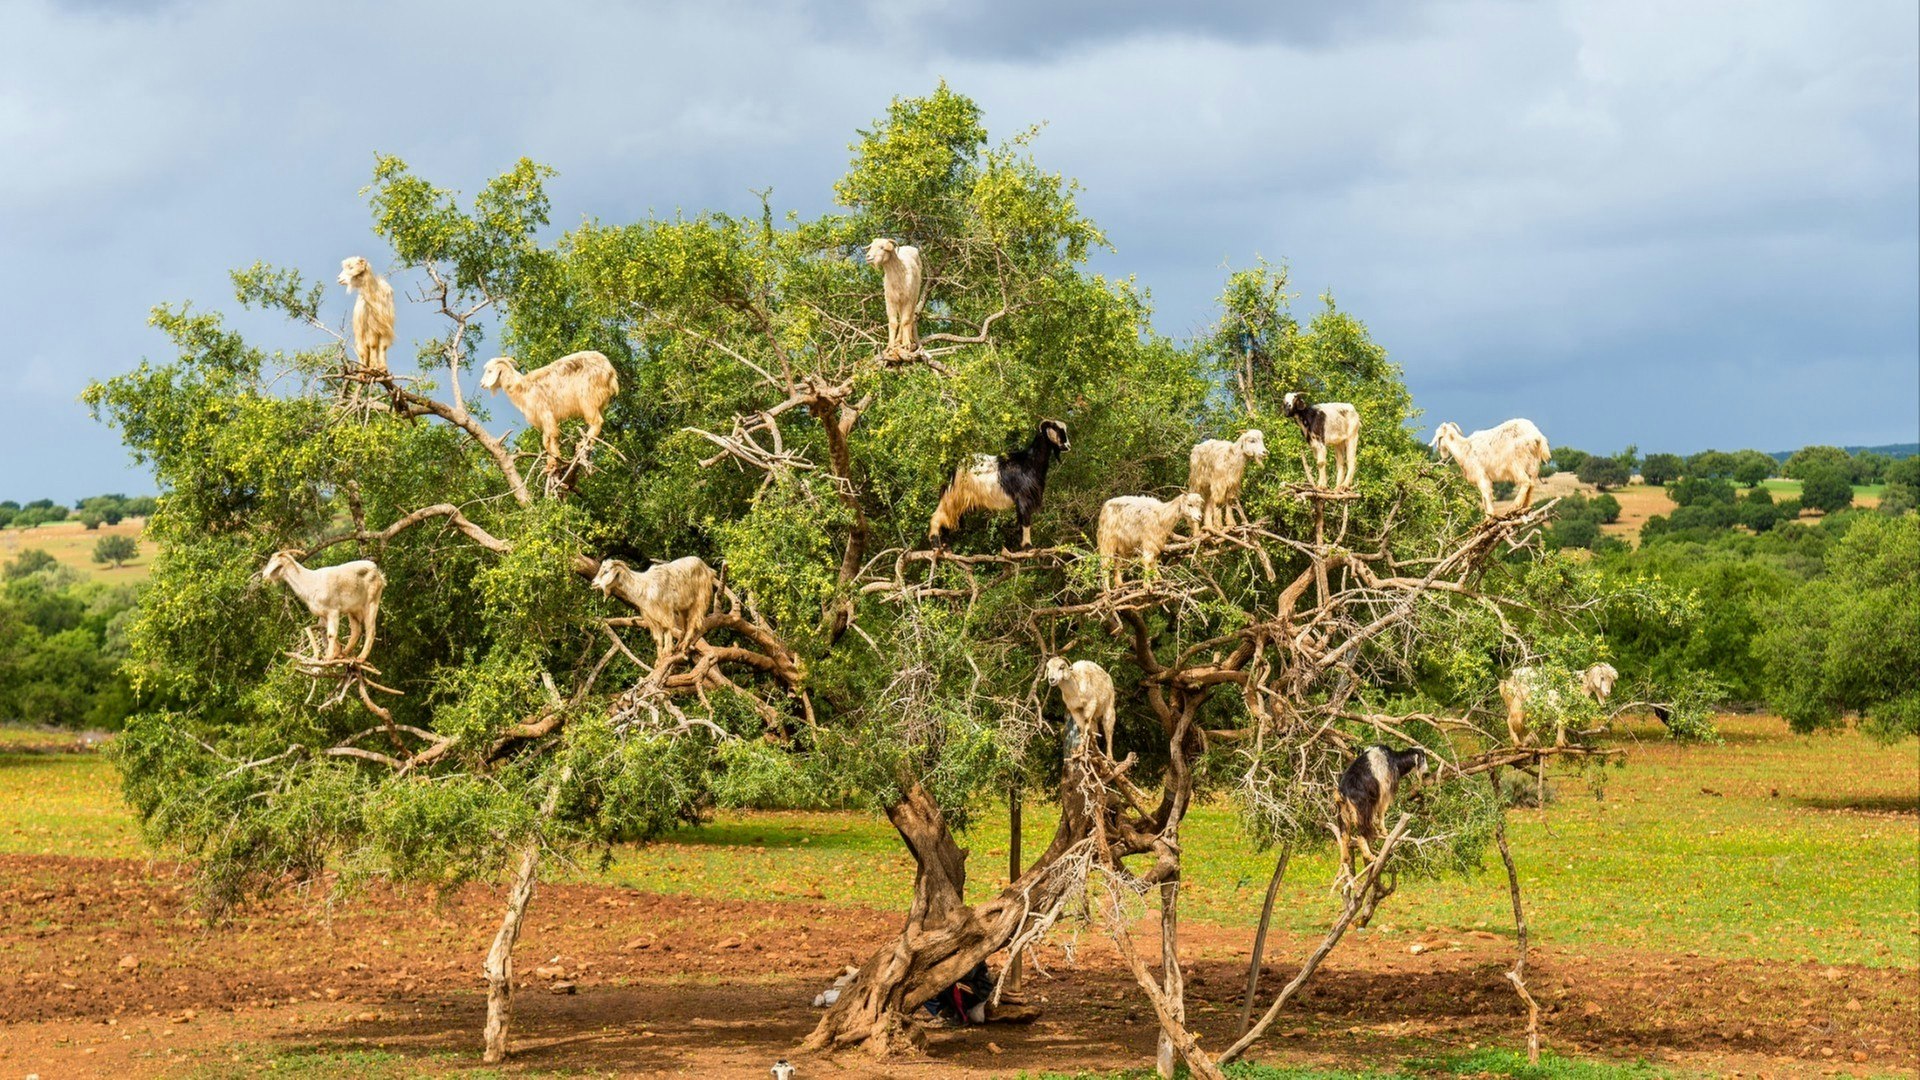 Goats graze on the Argan tree, Morocco North Africa